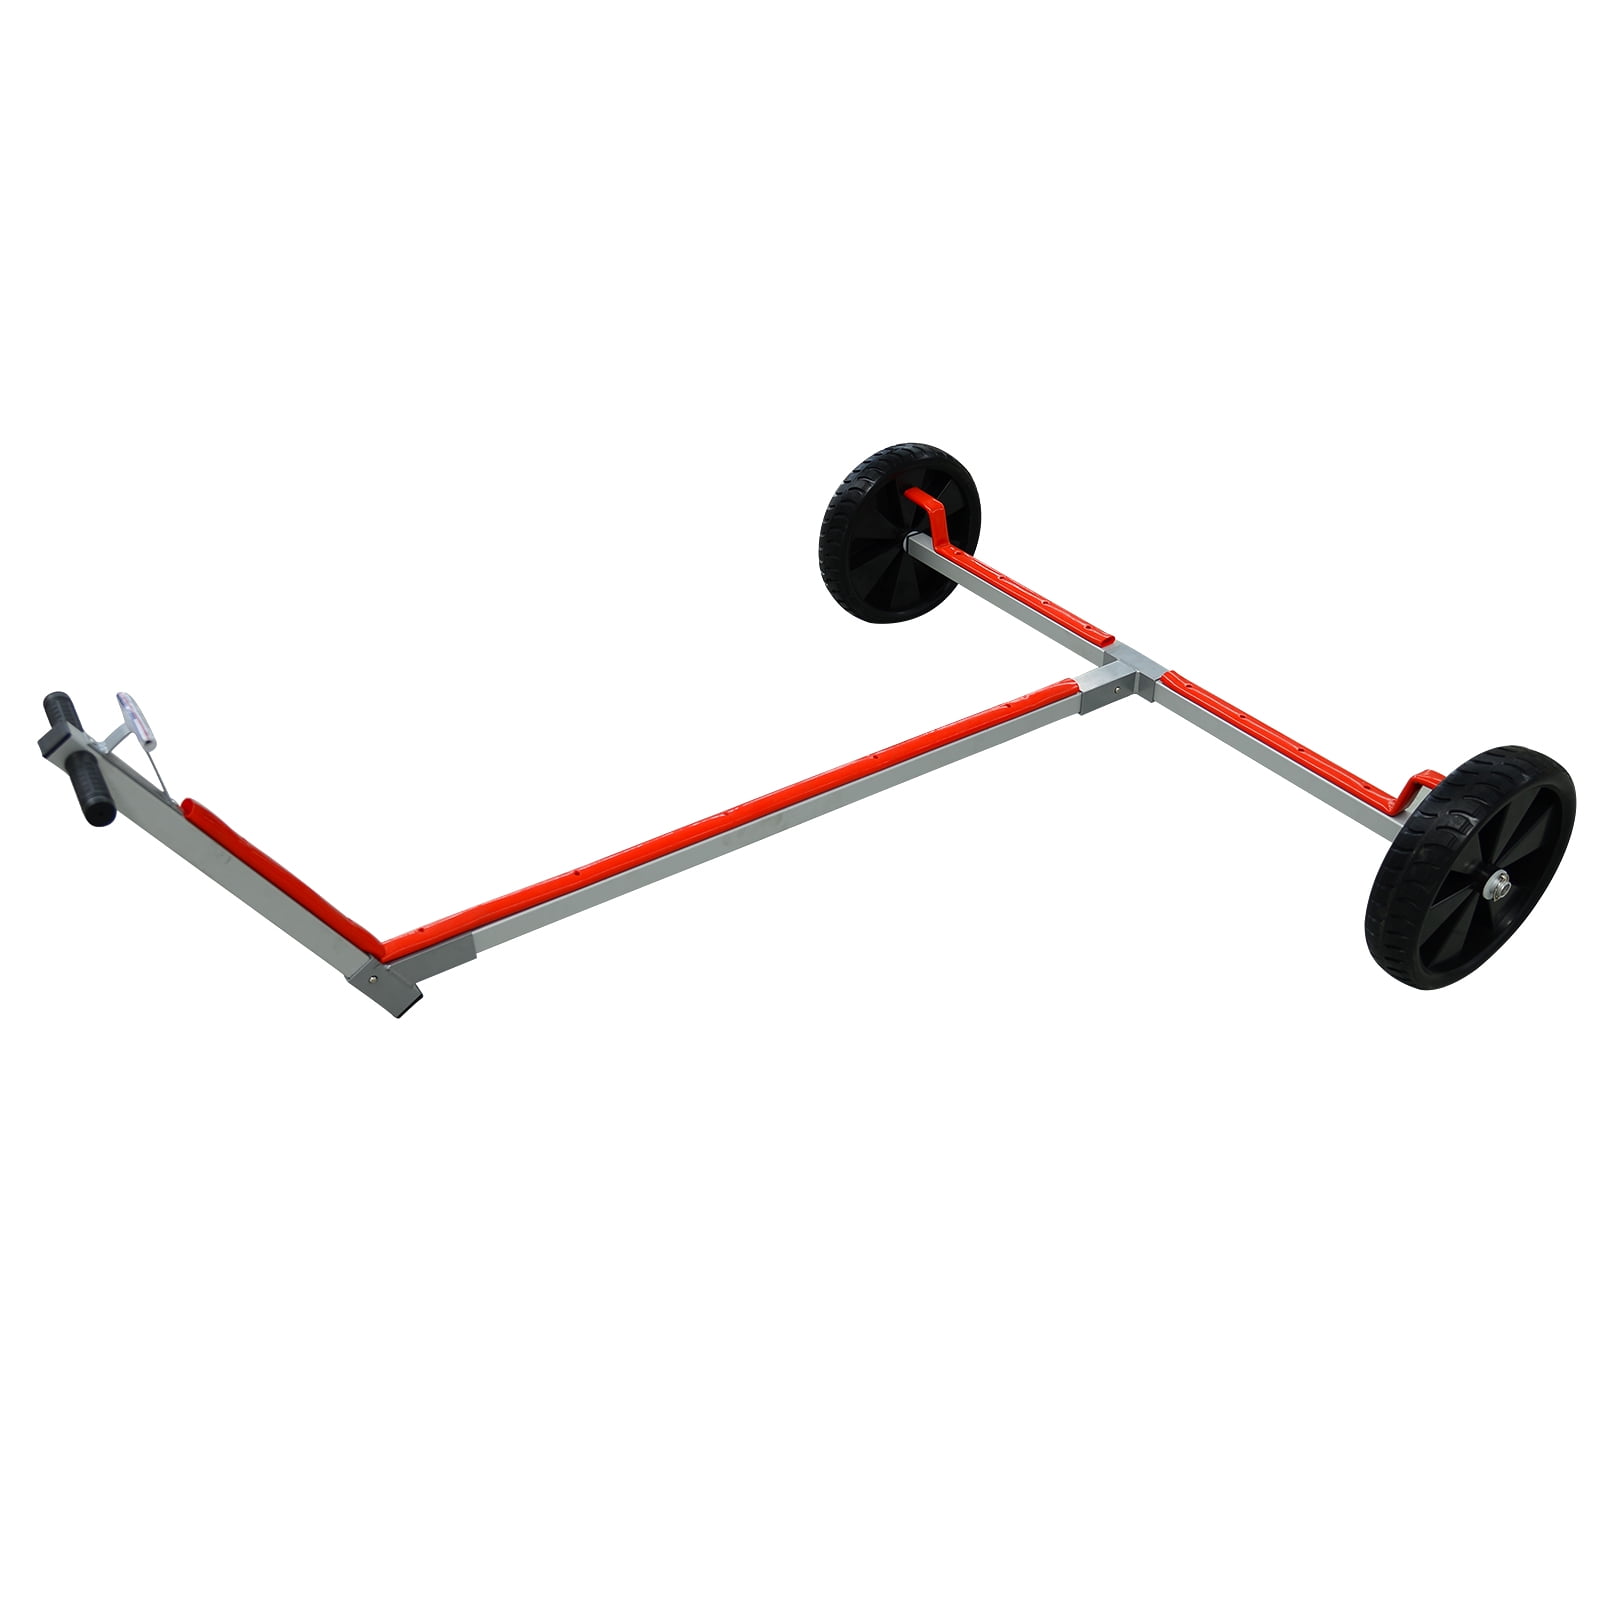 BRIS Boat Dolly for Optimist Sailboat with Wheels 